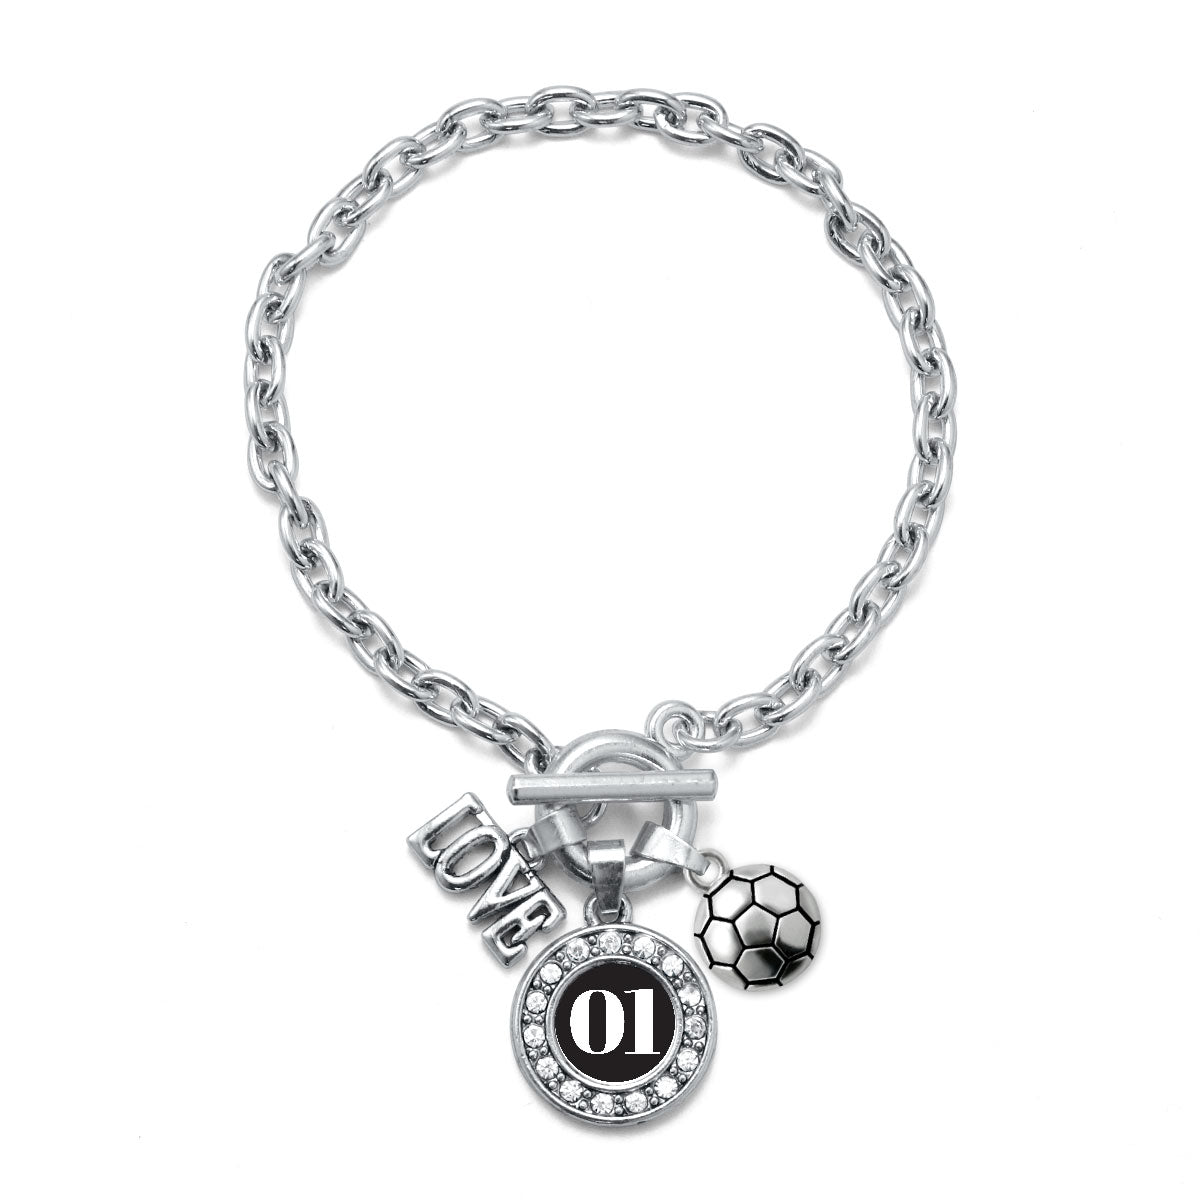 Silver Soccer - Sports Number 01 Circle Charm Toggle Bracelet